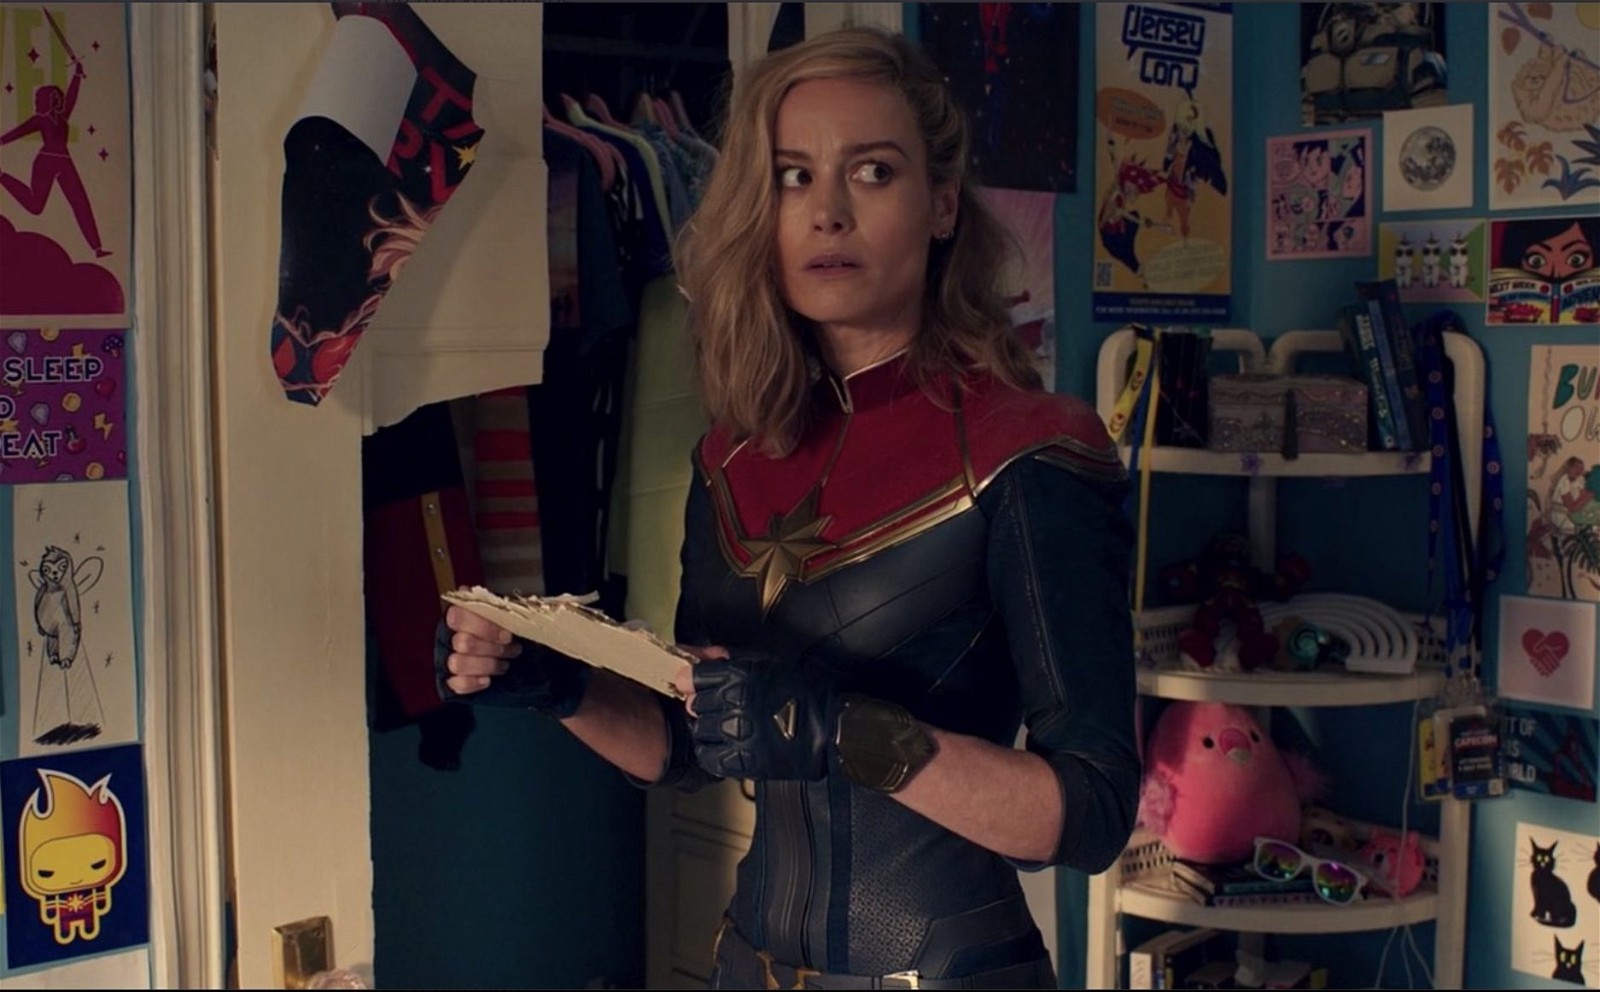 Brie Larson also appeared as Captain Marvel in Ms. Marvel (2022).